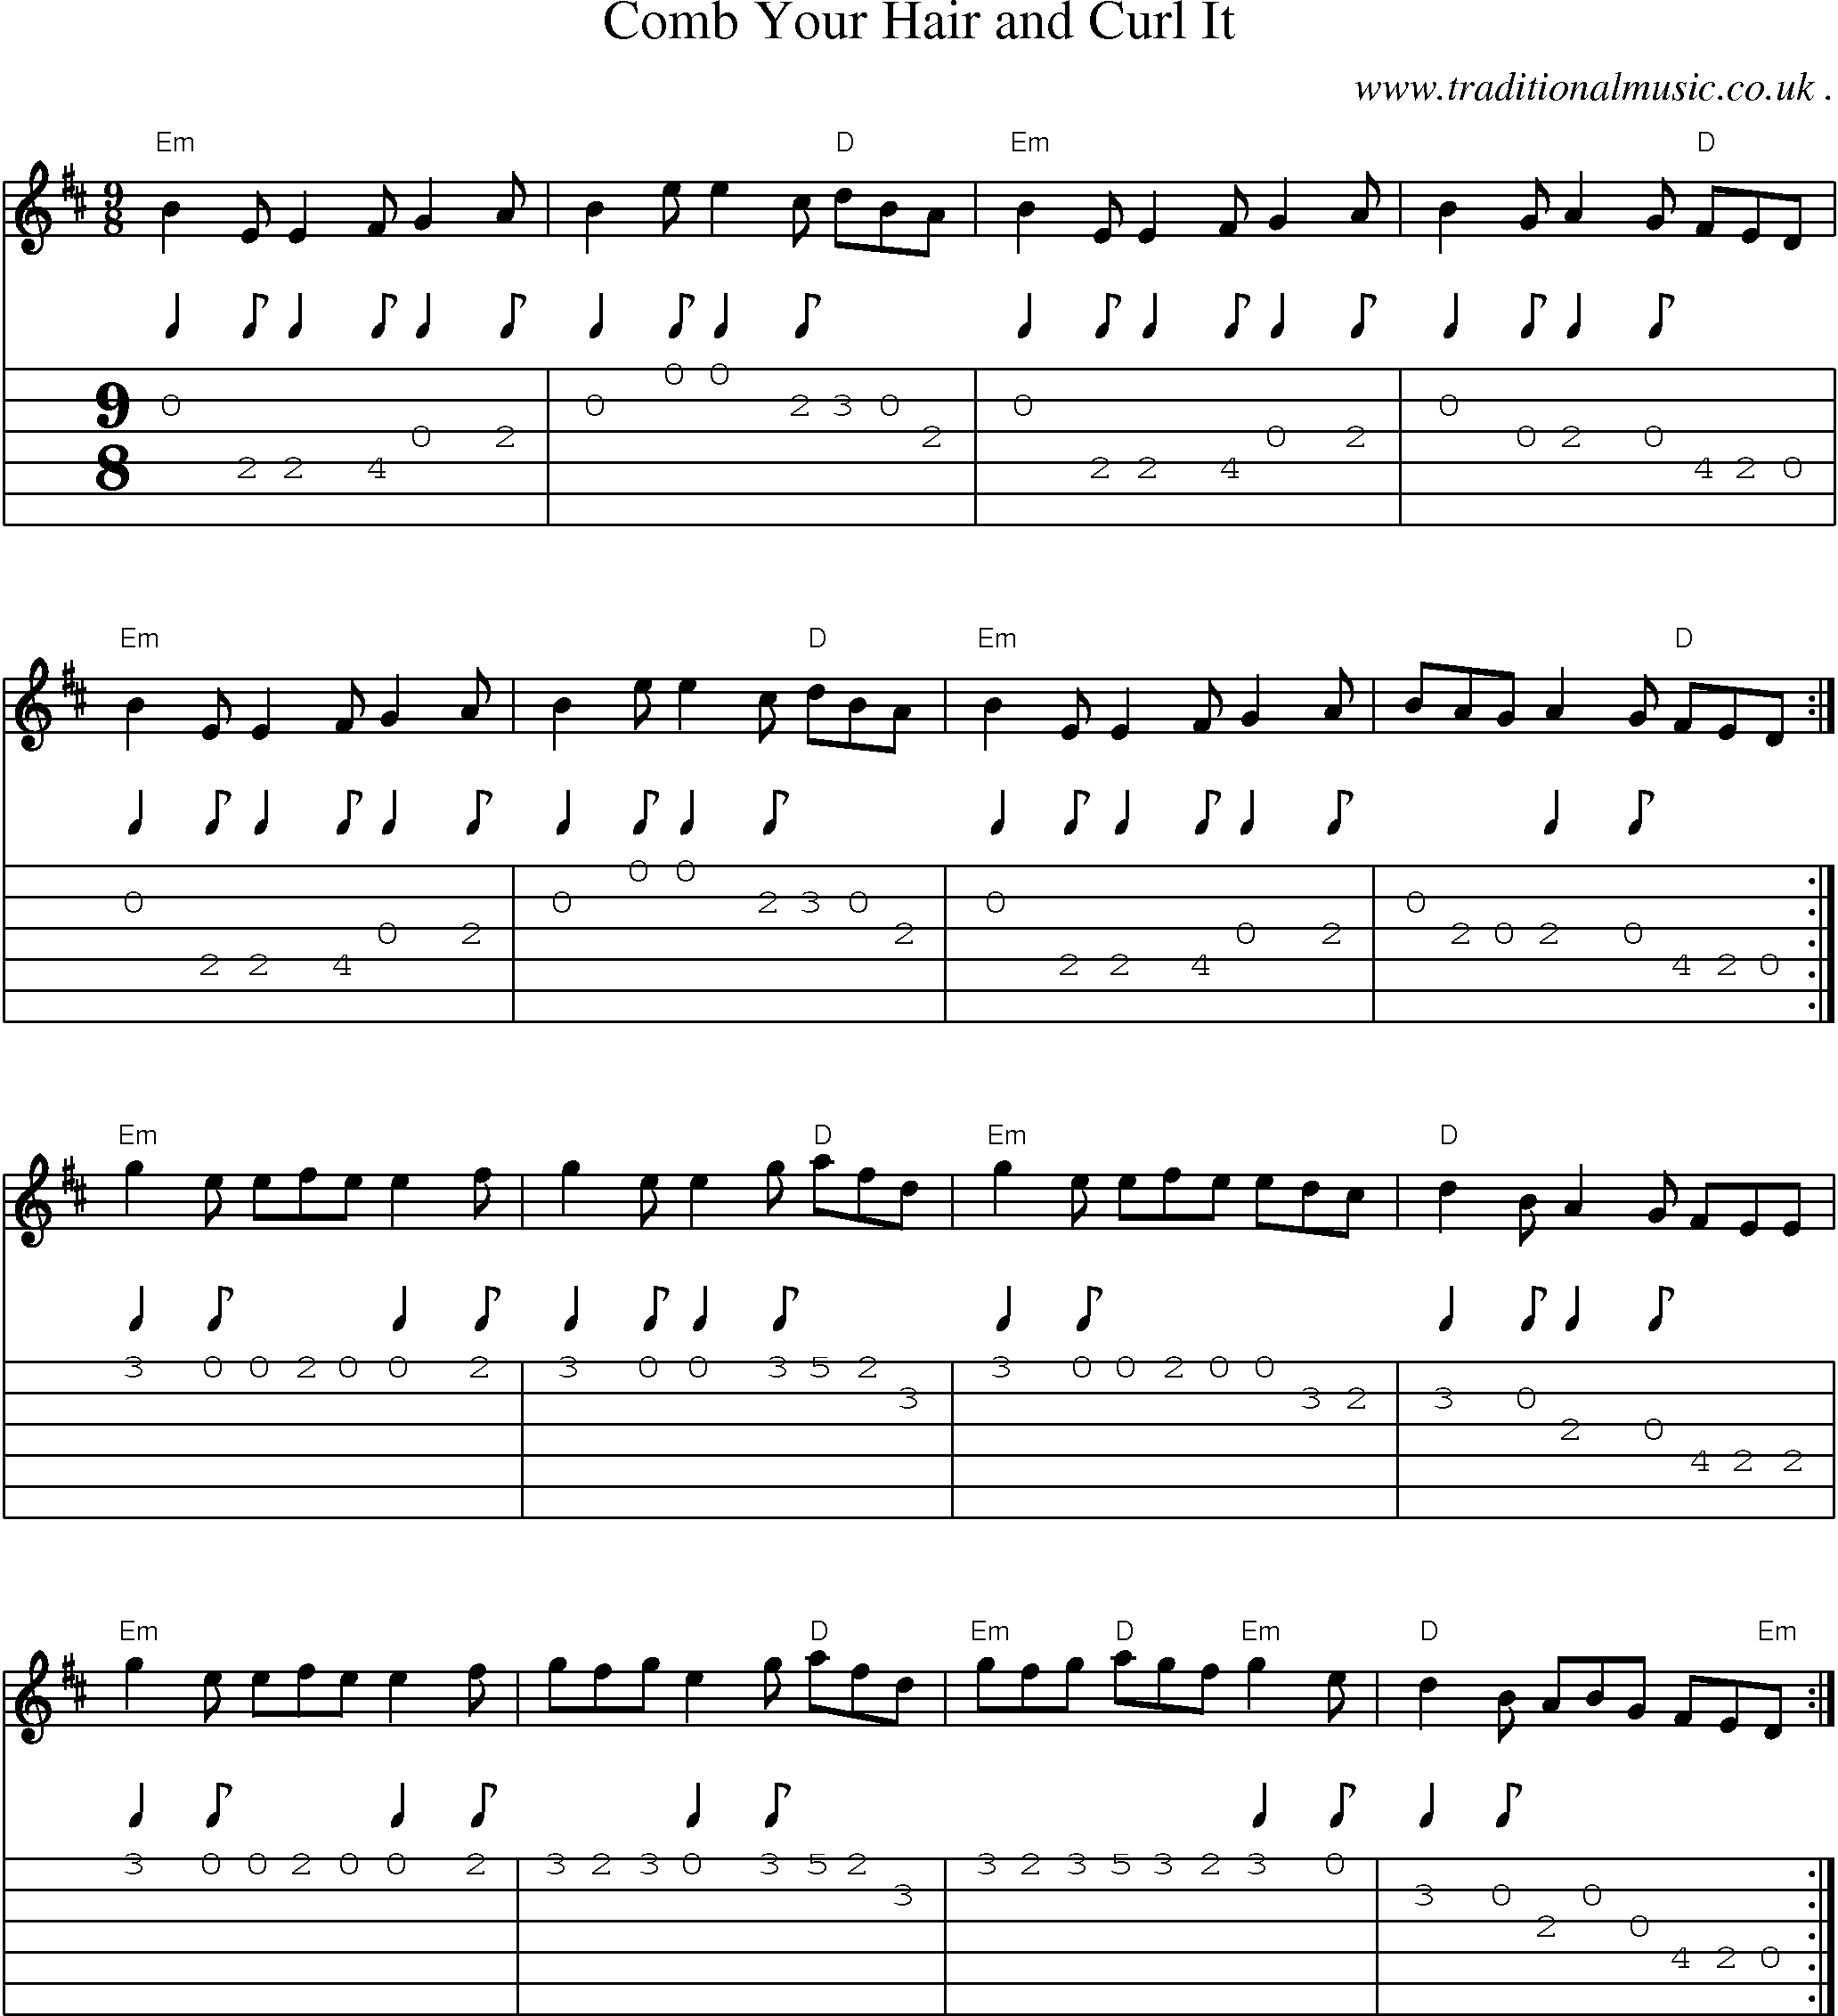 Music Score and Guitar Tabs for Comb Your Hair And Curl It